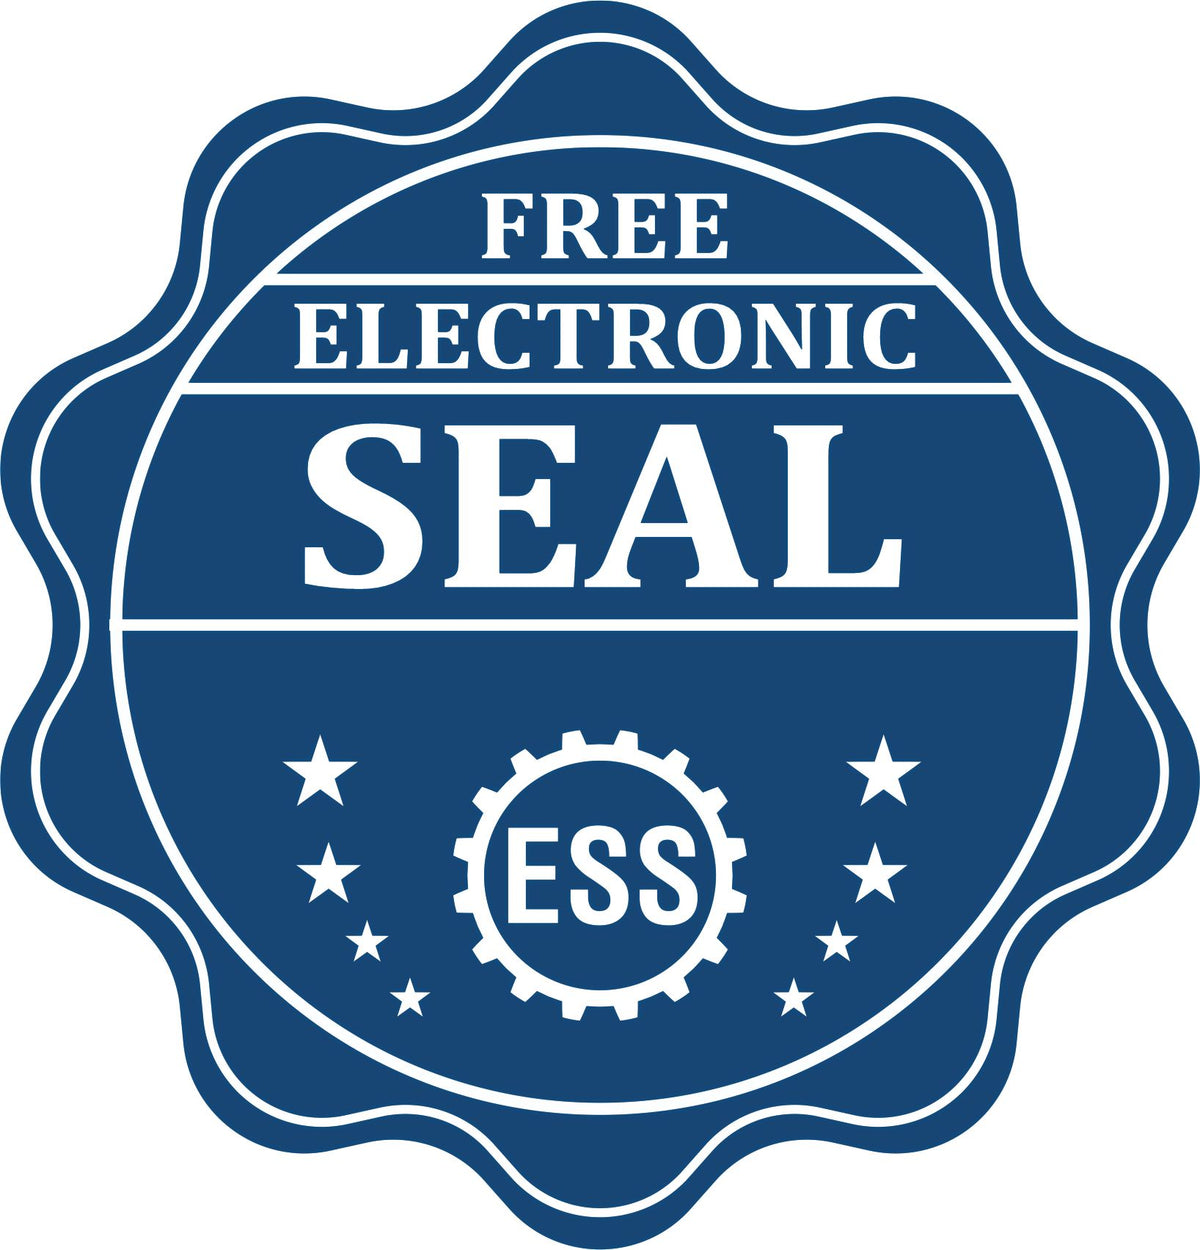 A badge showing a free electronic seal for the Slim Pre-Inked Colorado Professional Engineer Seal Stamp with stars and the ESS gear on the emblem.